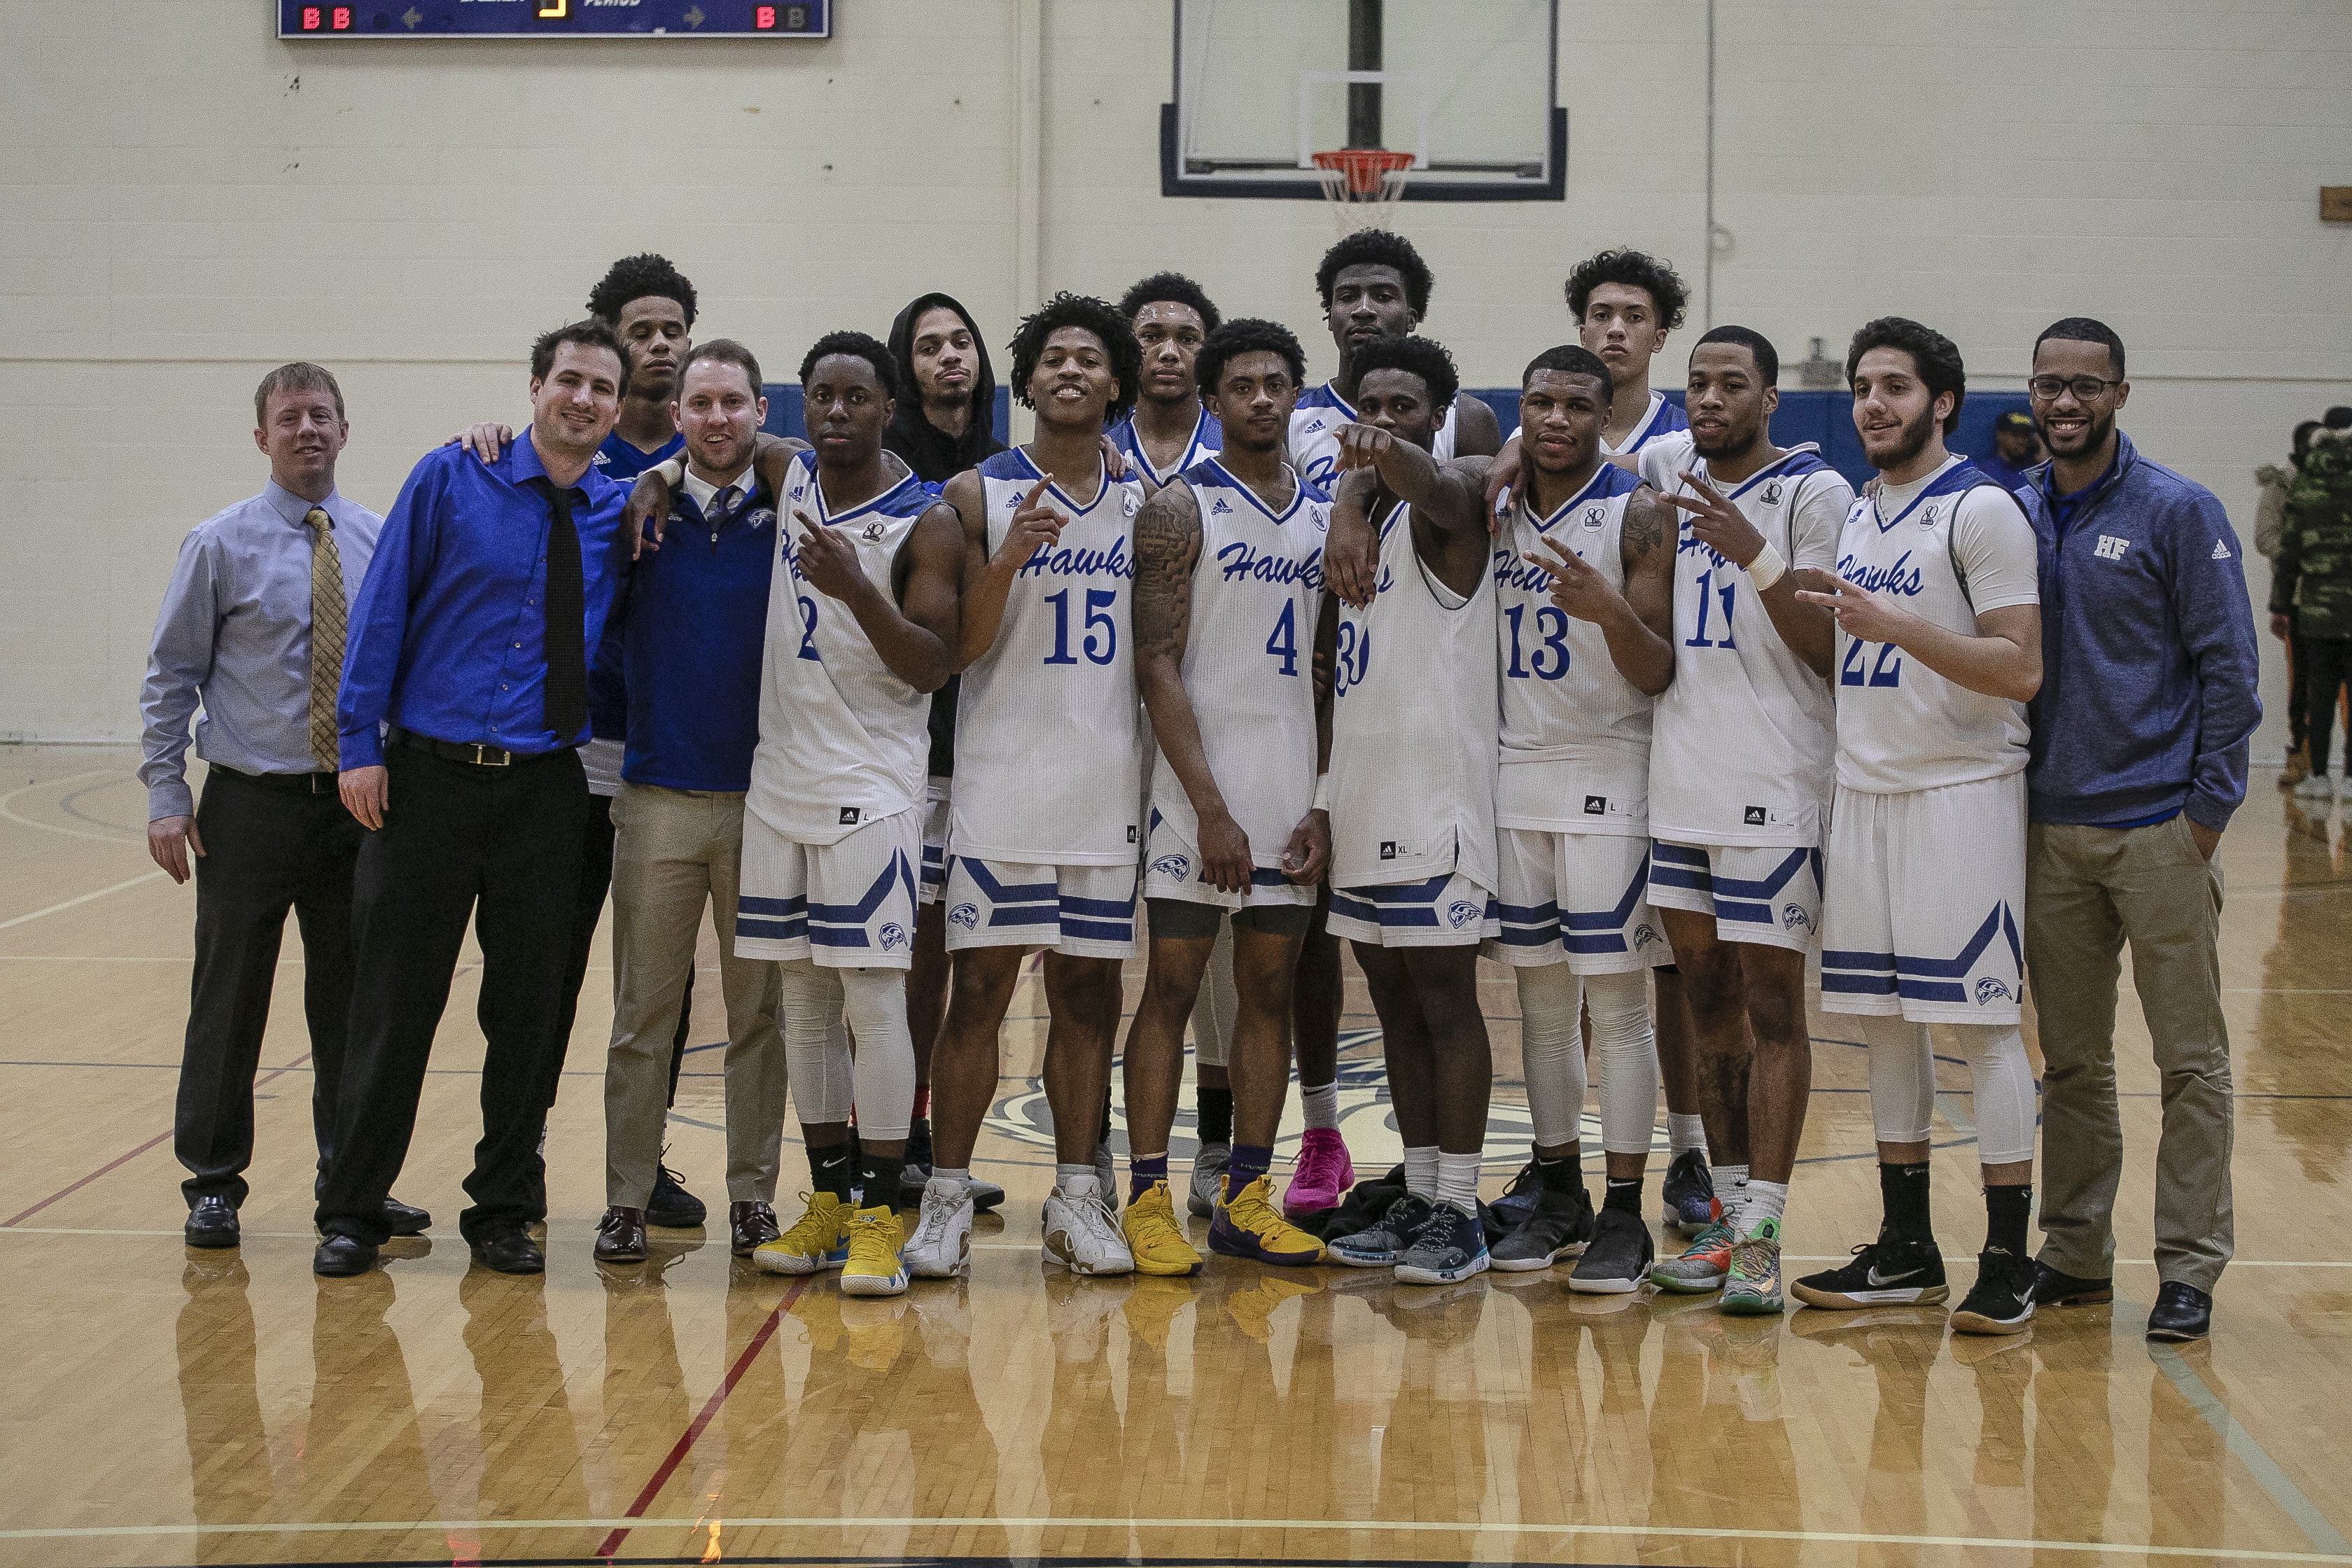 Henry Ford College men’s basketball team celebrating after winning against St. Clair College